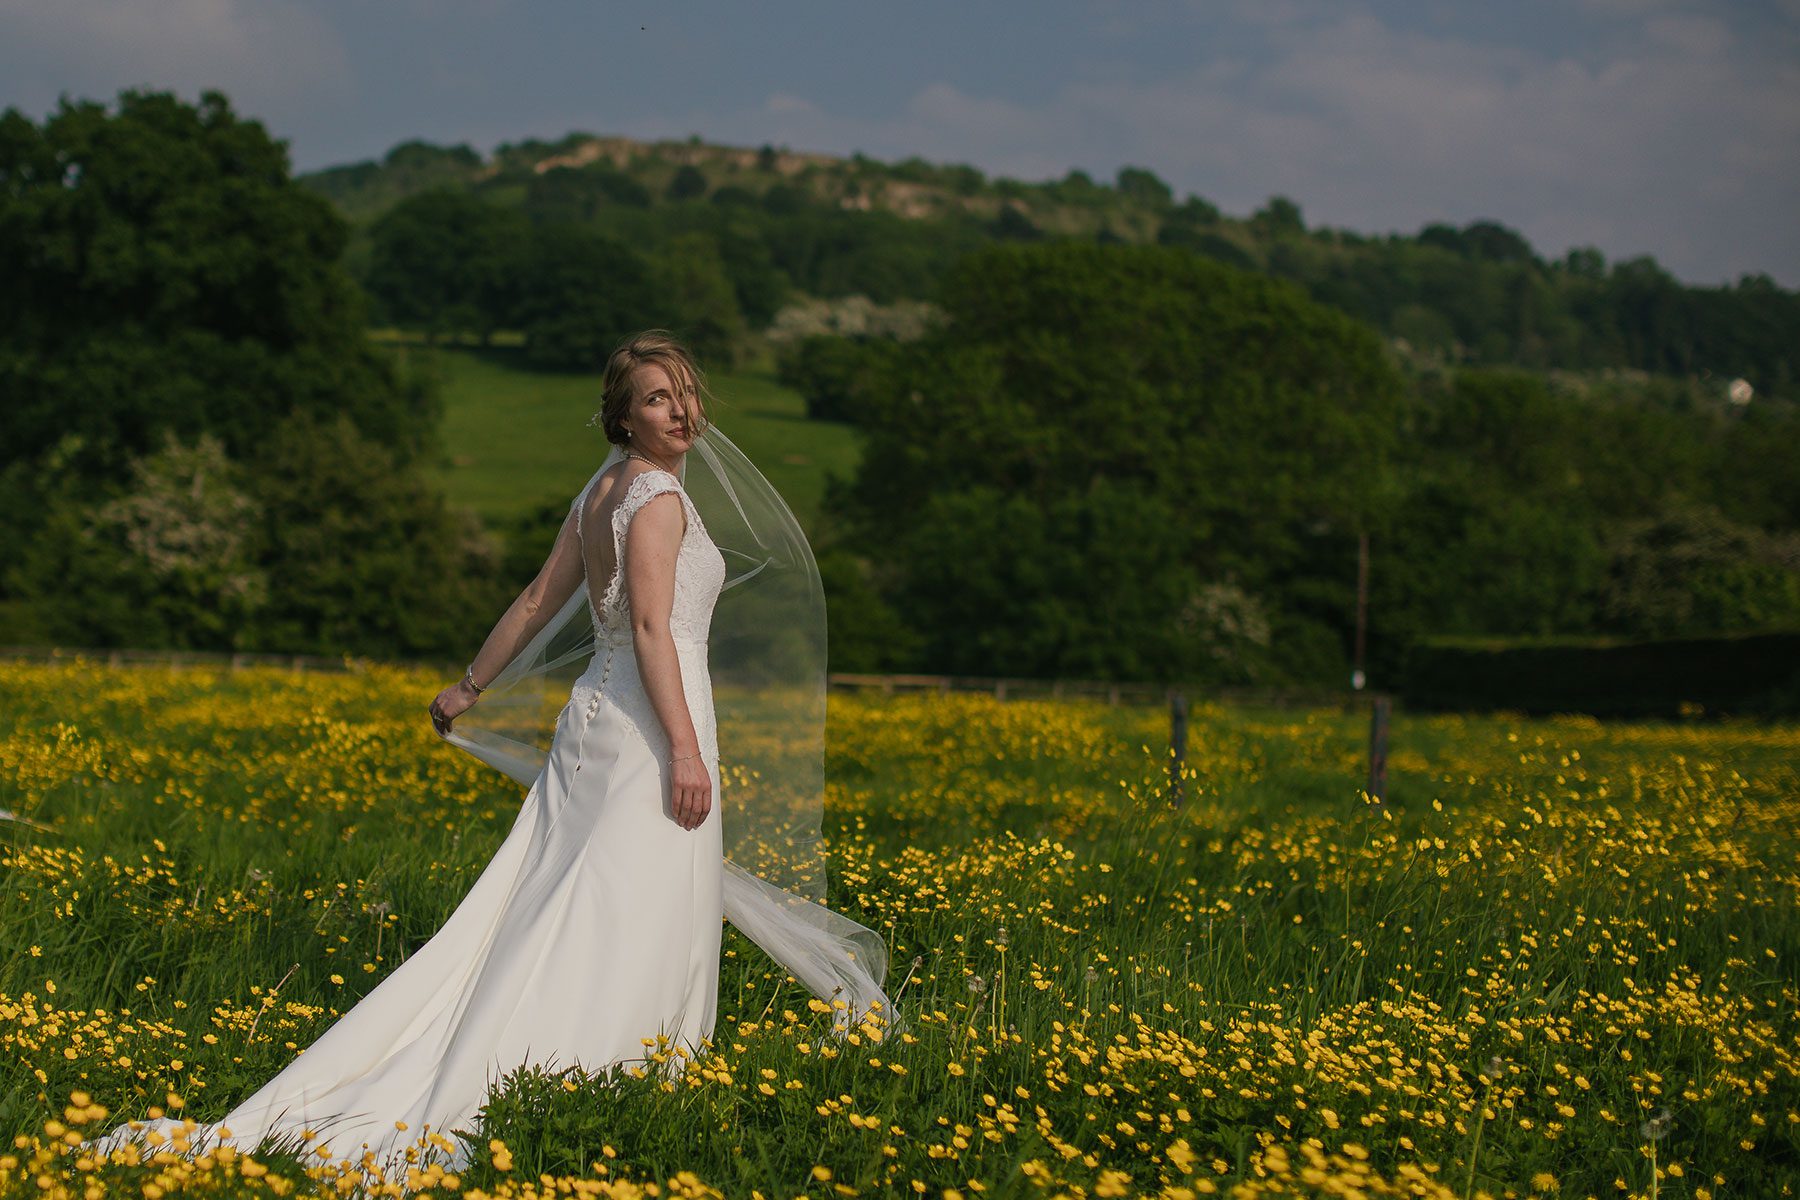 Bride in the breeze - Bullit Photography